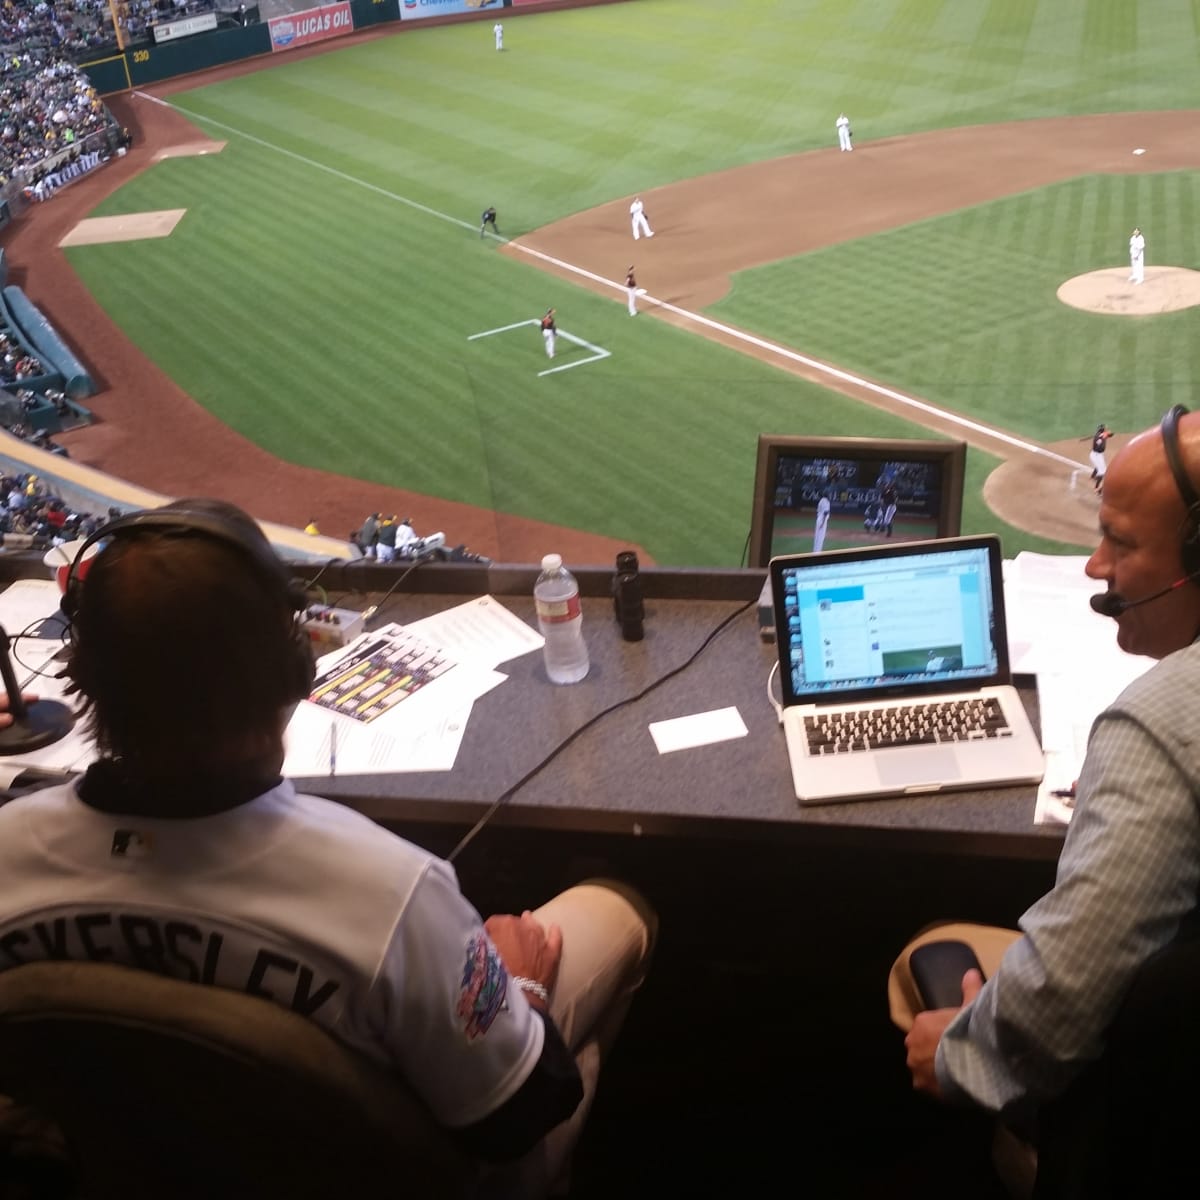 Will As radio silence be the start of another impressive MLB career?